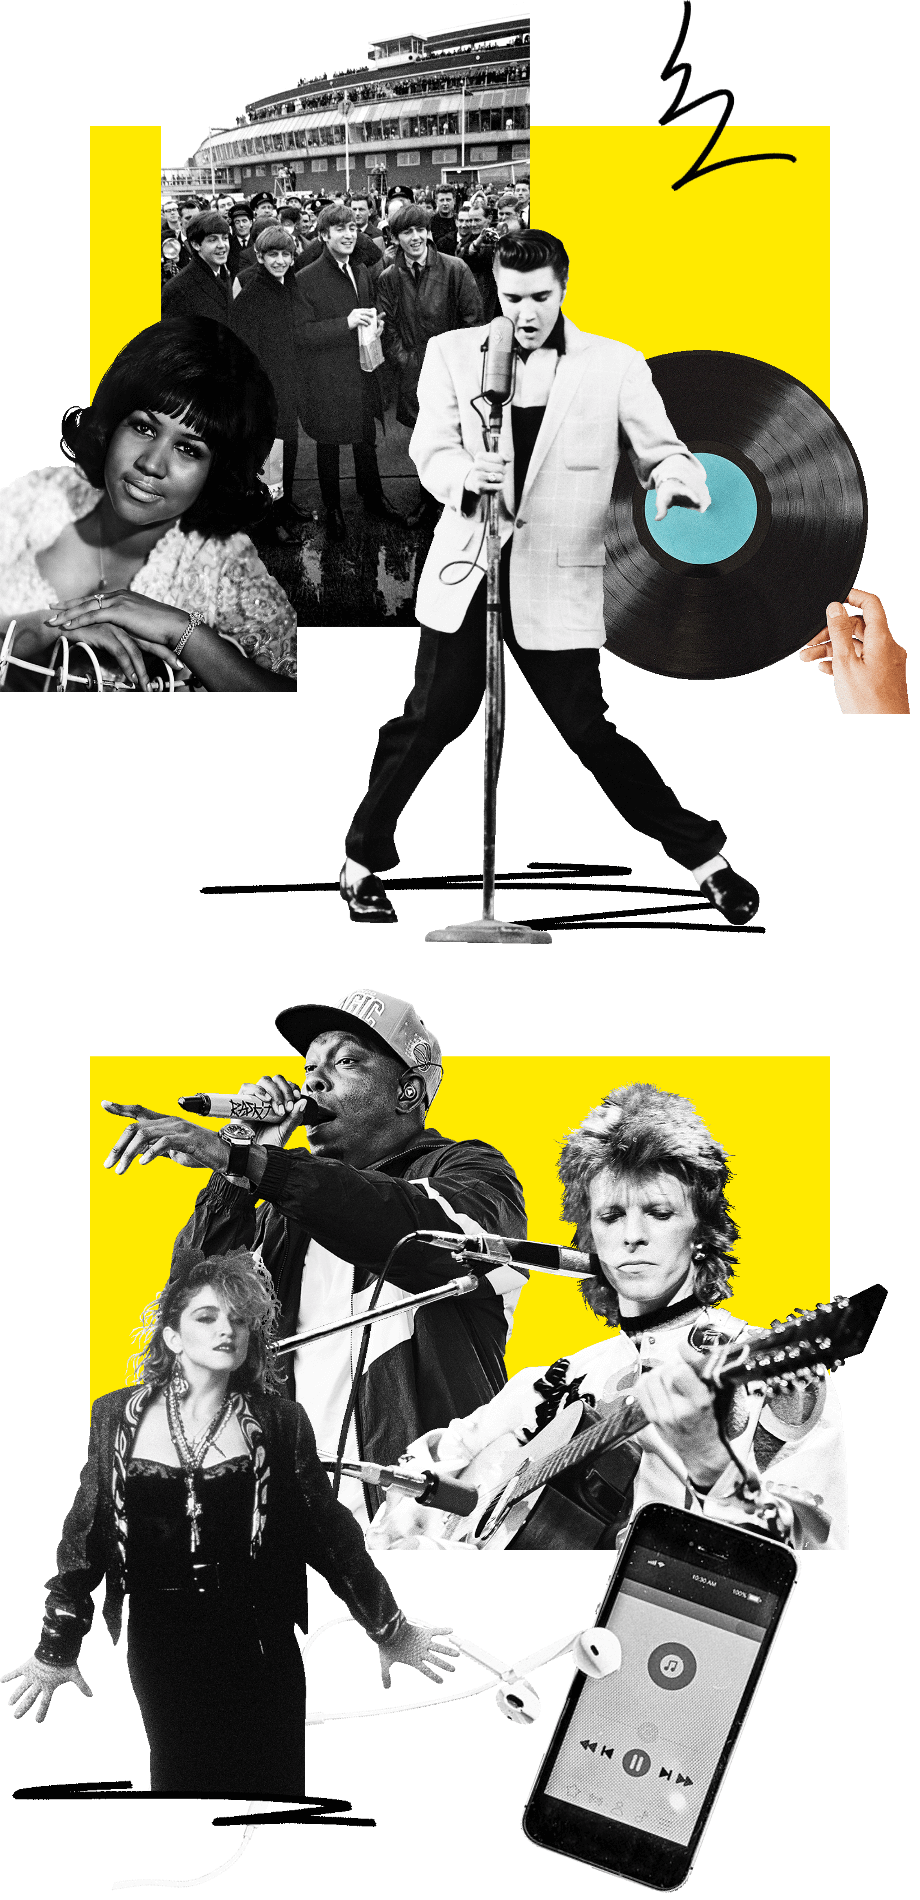 Composite image of Elvis, the Beatles, Aretha Franklin, David Bowie, Madonna, Dizzee Rascal, a record and an ipod with headphones